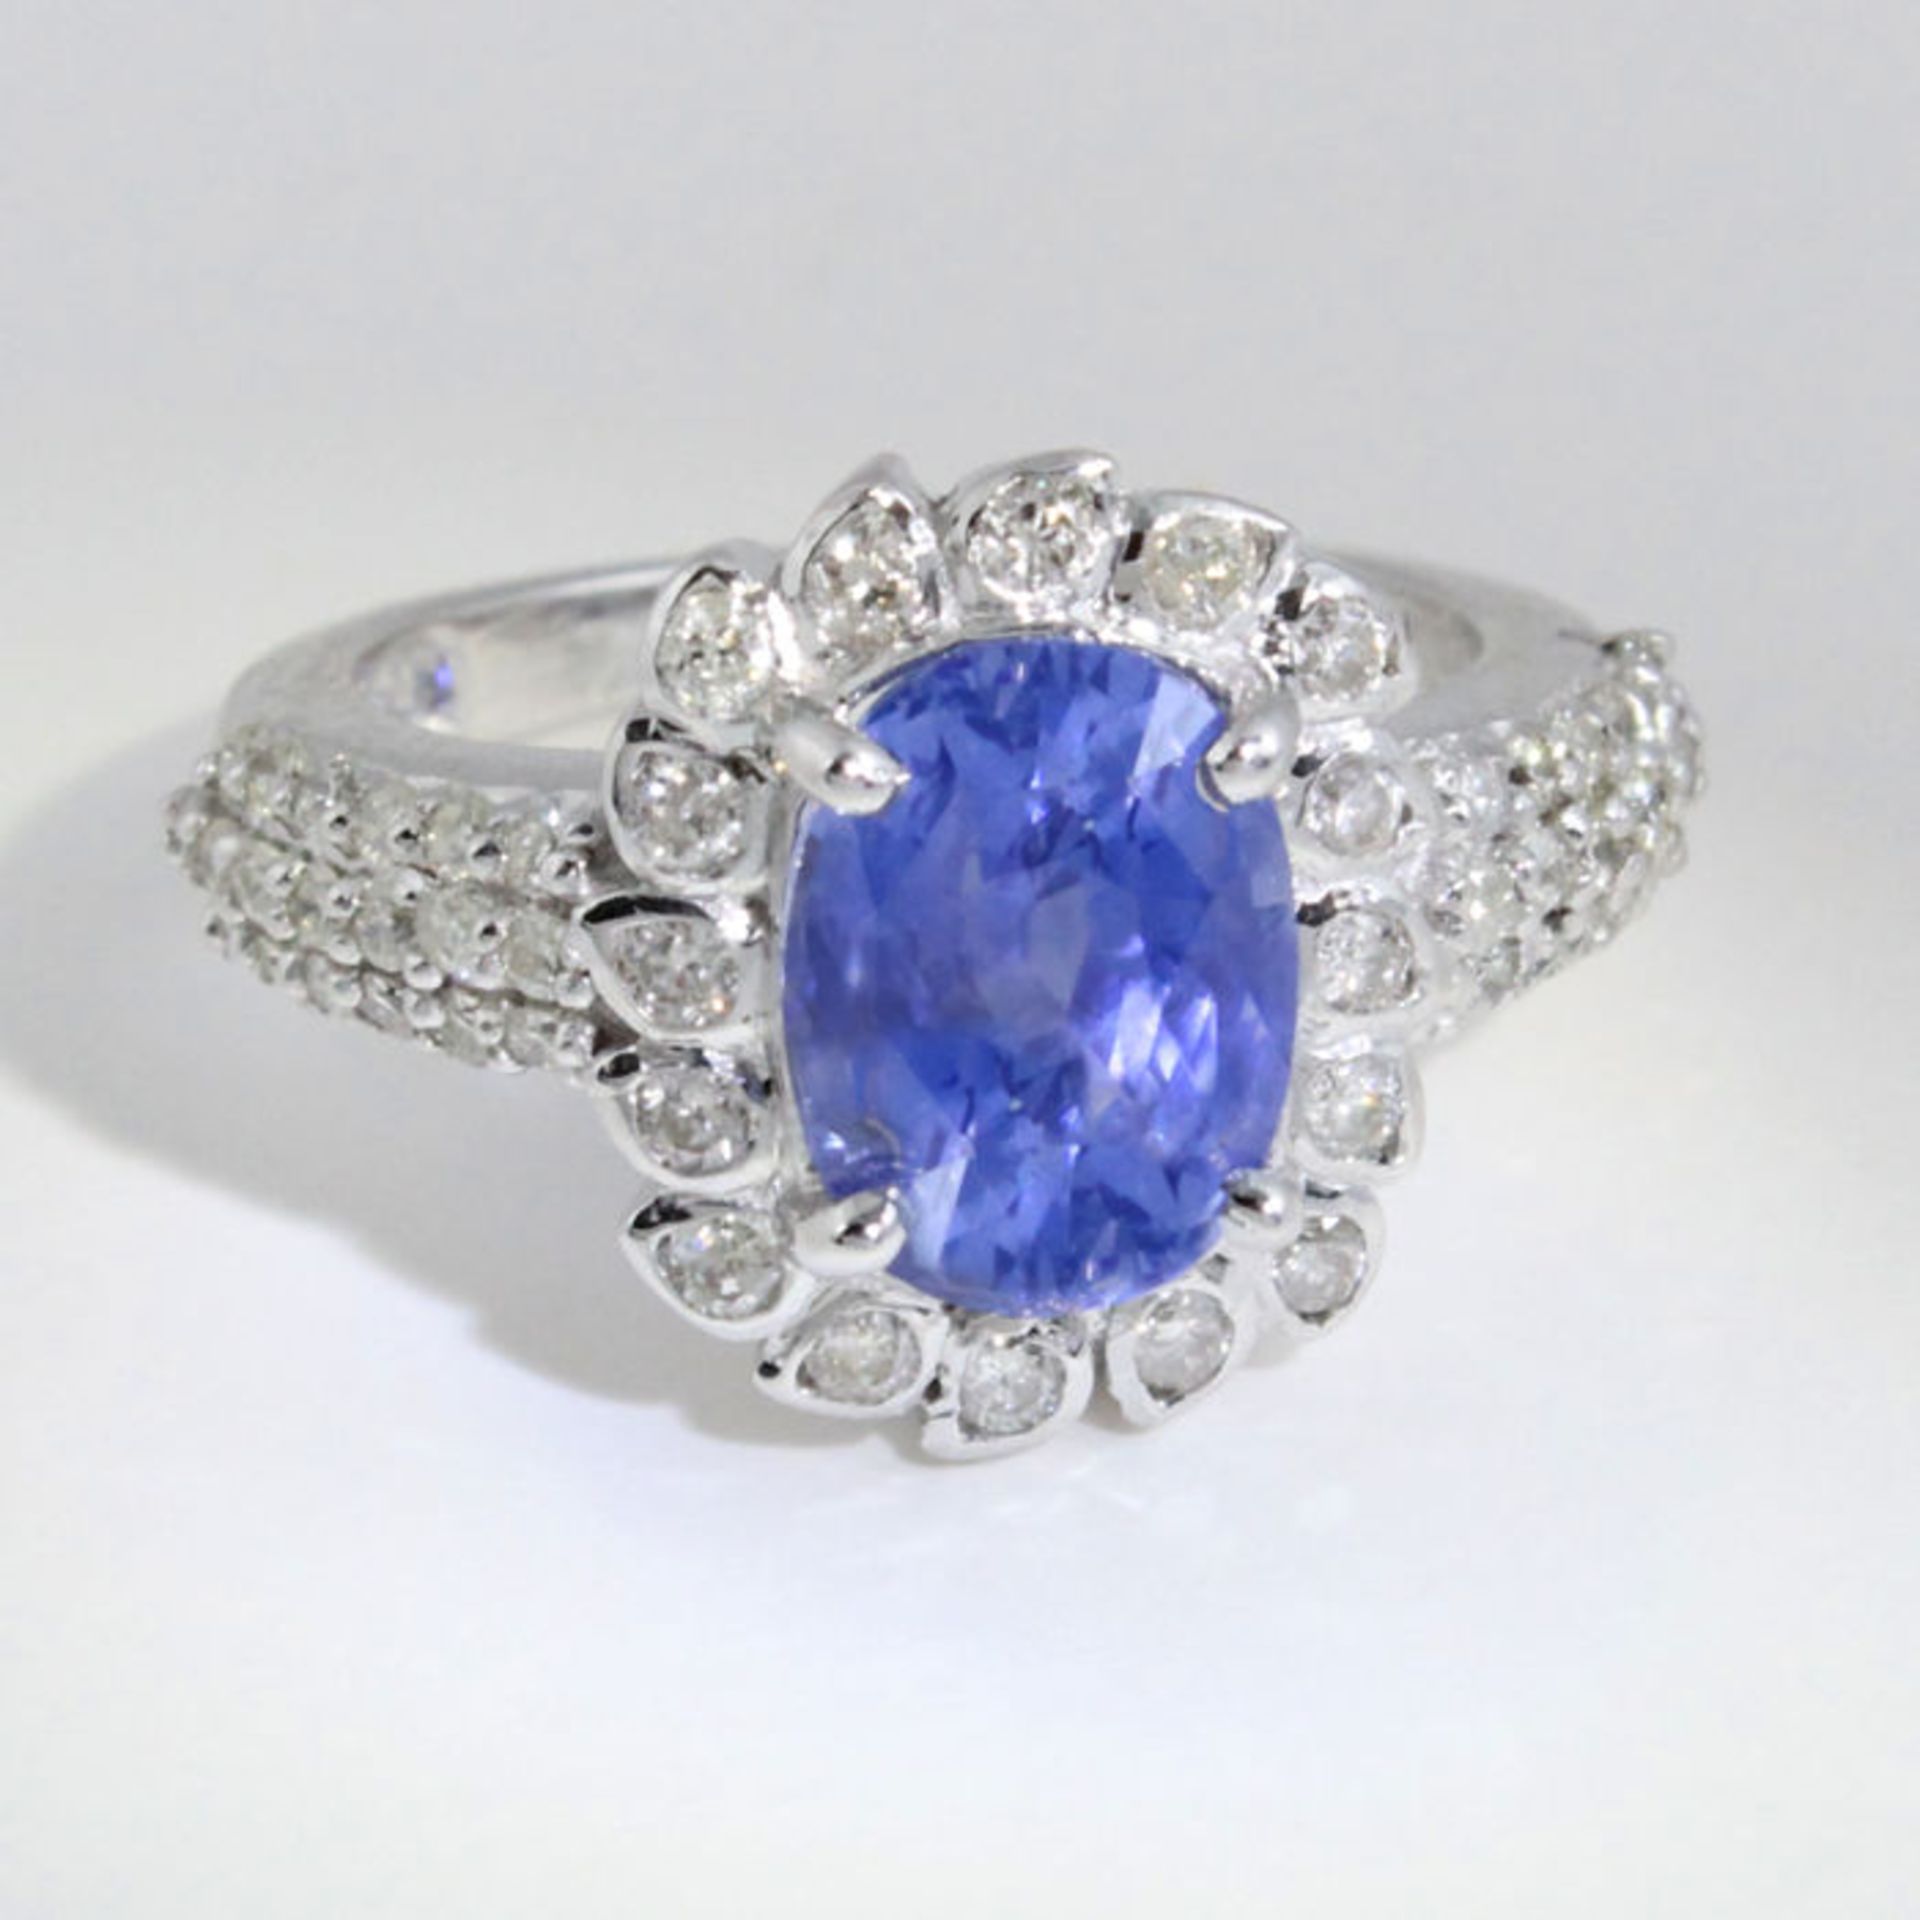 14 K / 585 White Gold Very Exclusive Designer Blue Sapphire (IGI Certified) and Diamond Ring - Image 2 of 7